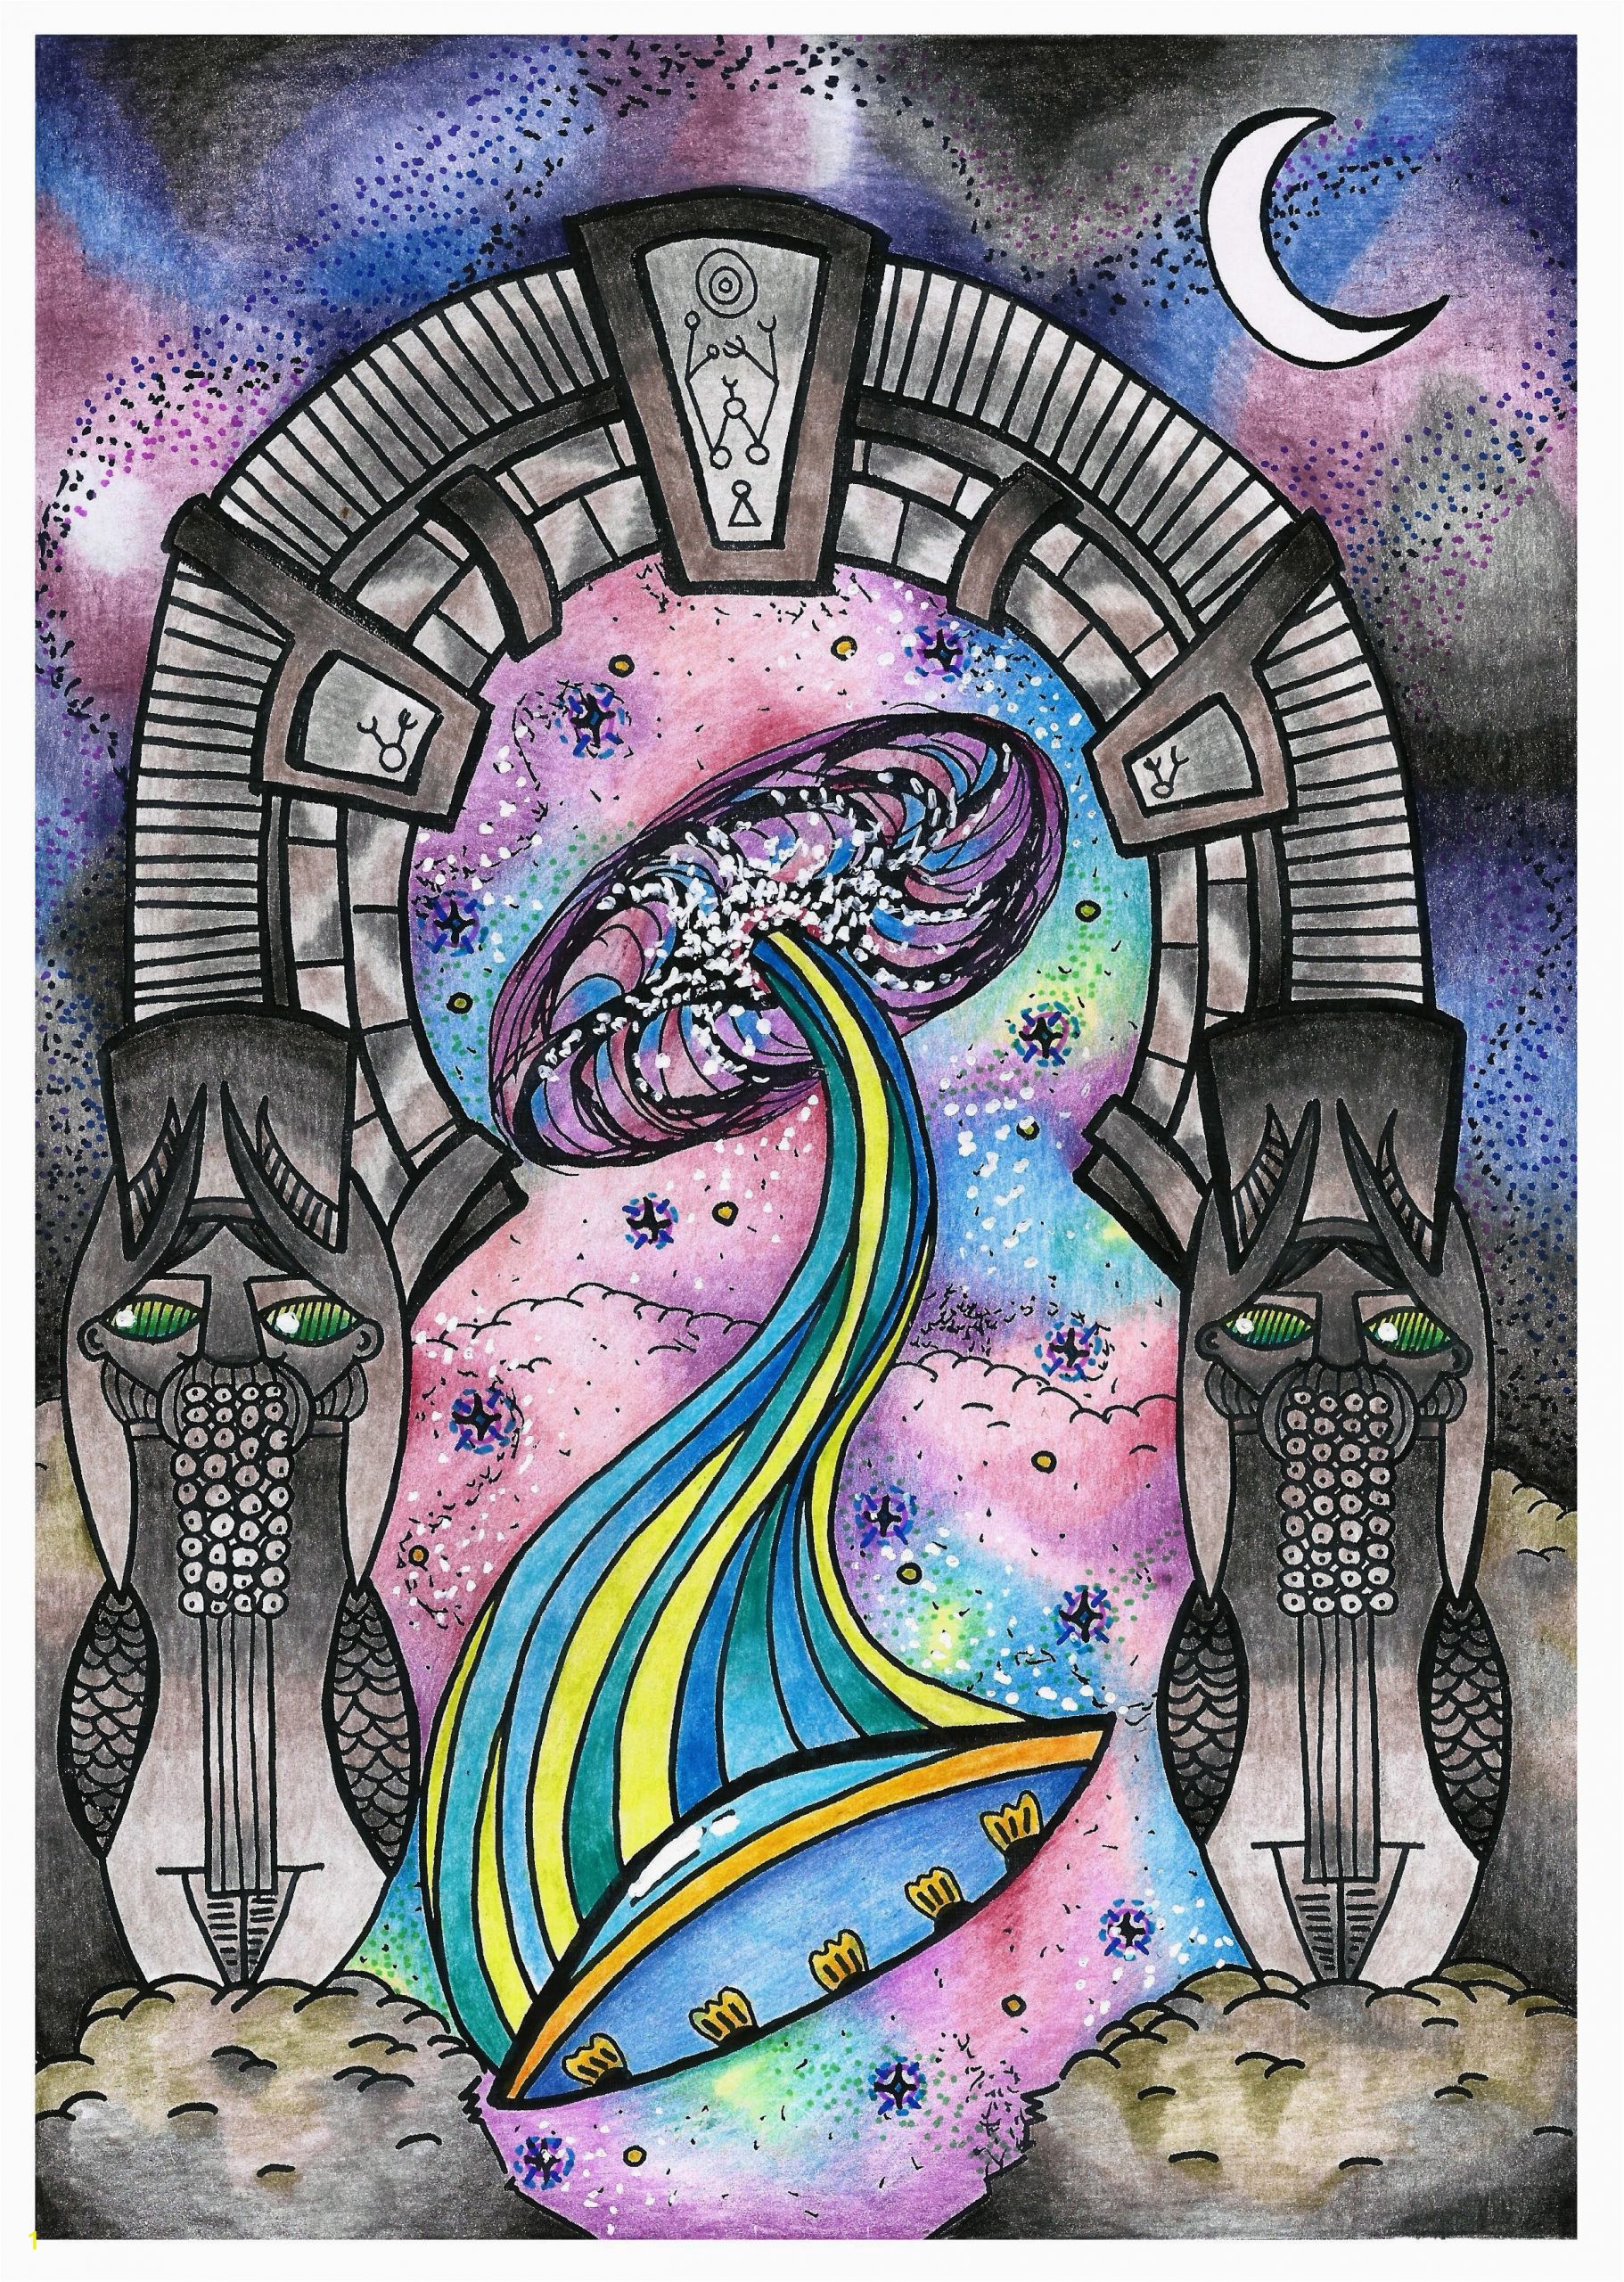 Trippy Coolest Coloring Page Woah Trippy and Beautiful Finished Portal Coloring From